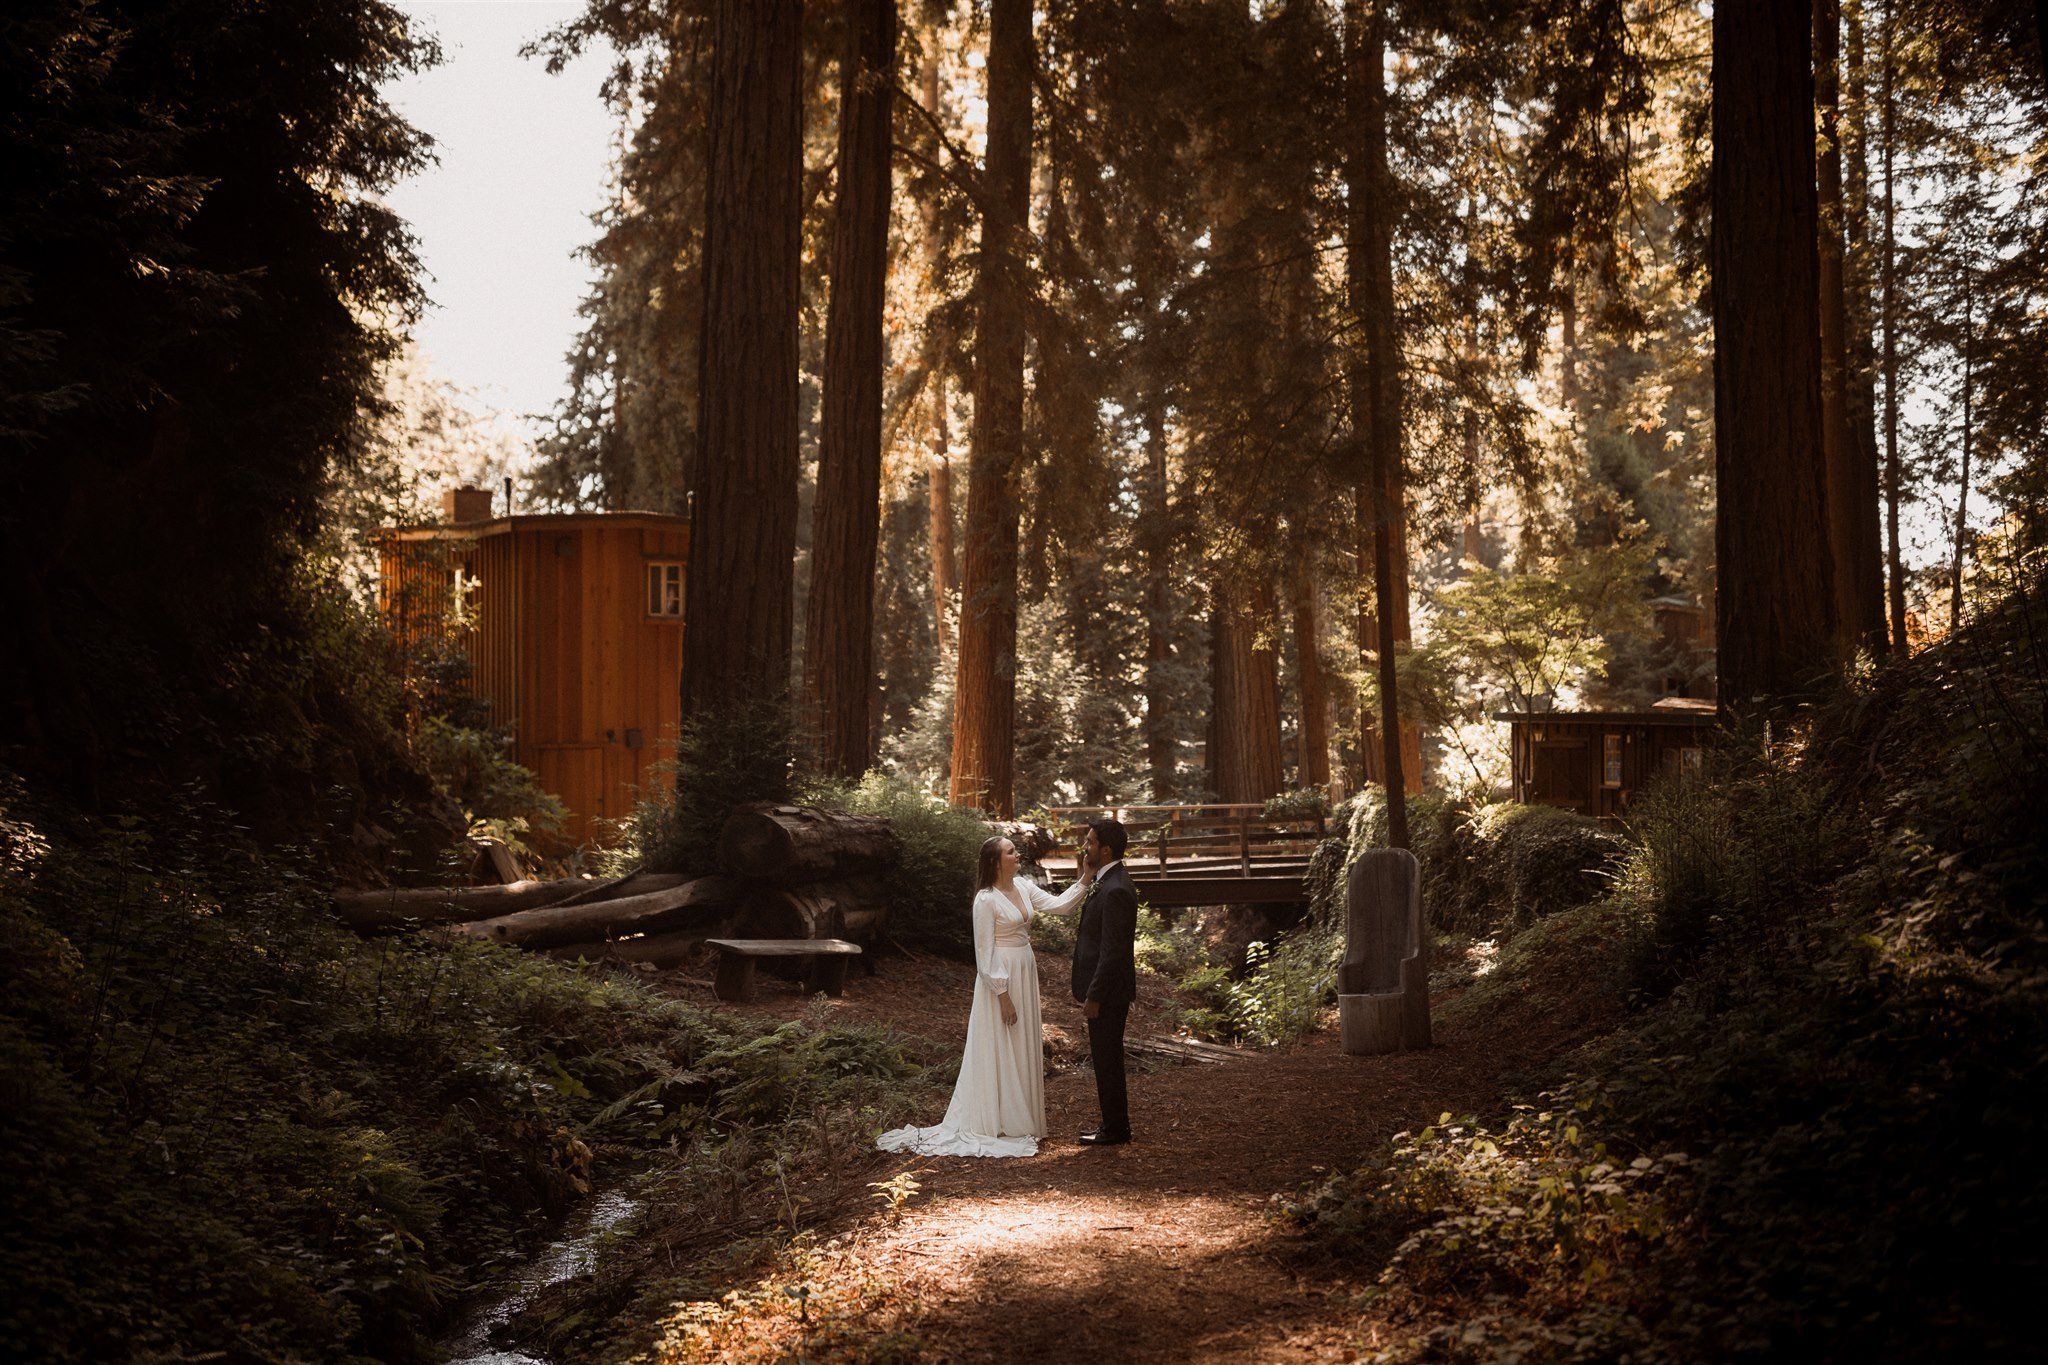 024_Two-Day Big Sur Redwoods Elopement with Family_Will Khoury Elopement Photographer.jpg